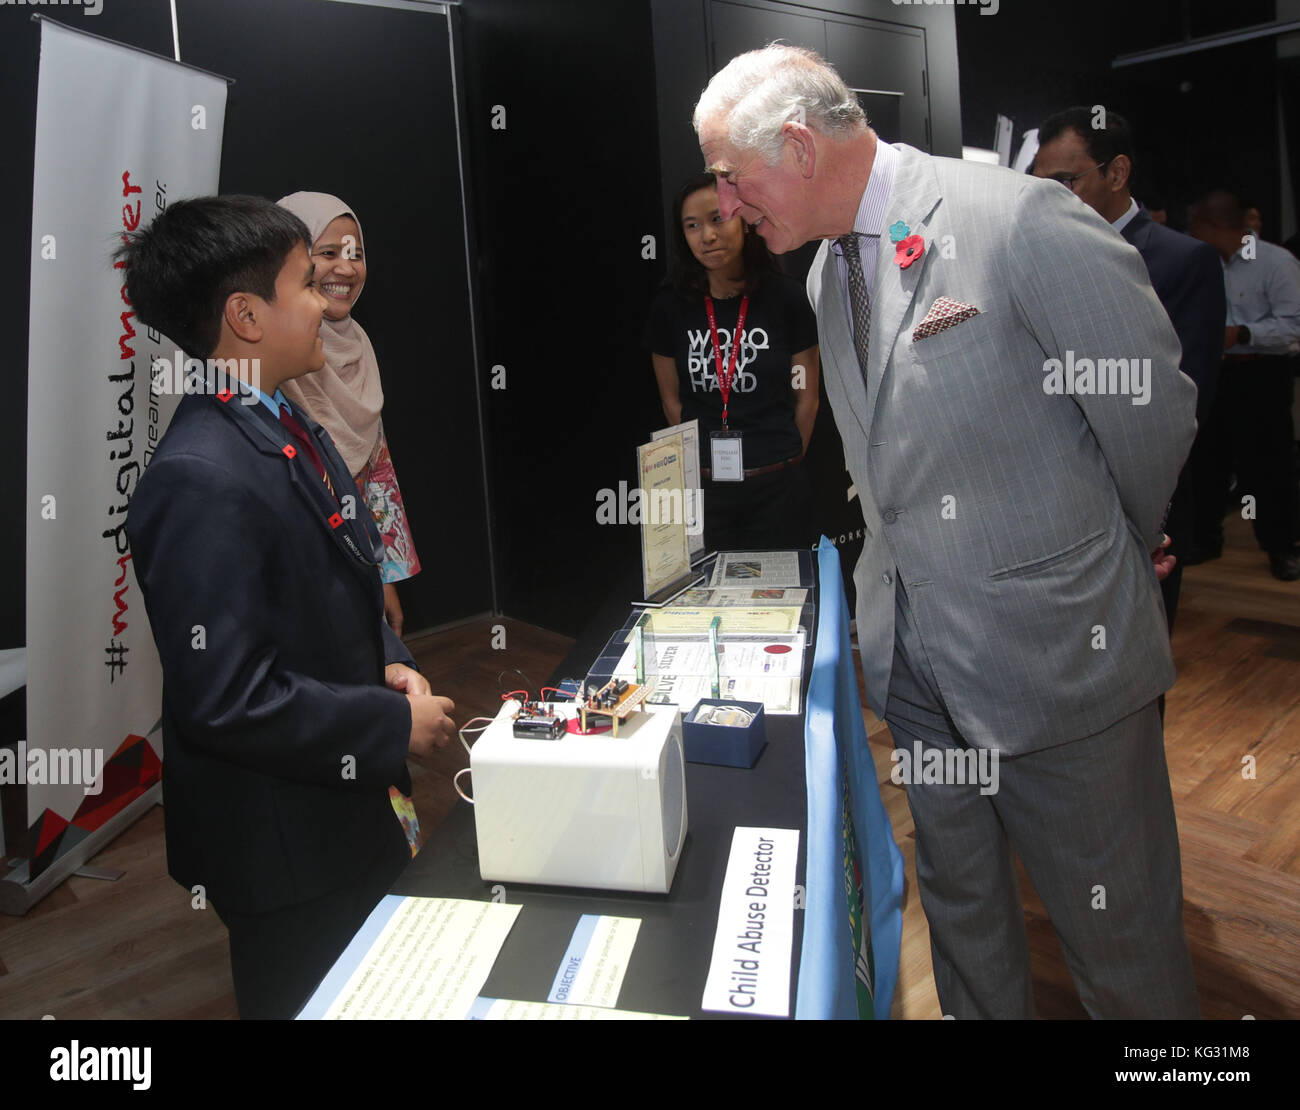 The Prince of Wales meets 12-year-old Ariff Almir Ali with his 'child abuse detector' device, at a tour of MyDigitalMaker Student Showcase during his visit to Worq Co-working space for Young Entrepreneurs, in Kuala Lumpur, Malaysia. Stock Photo